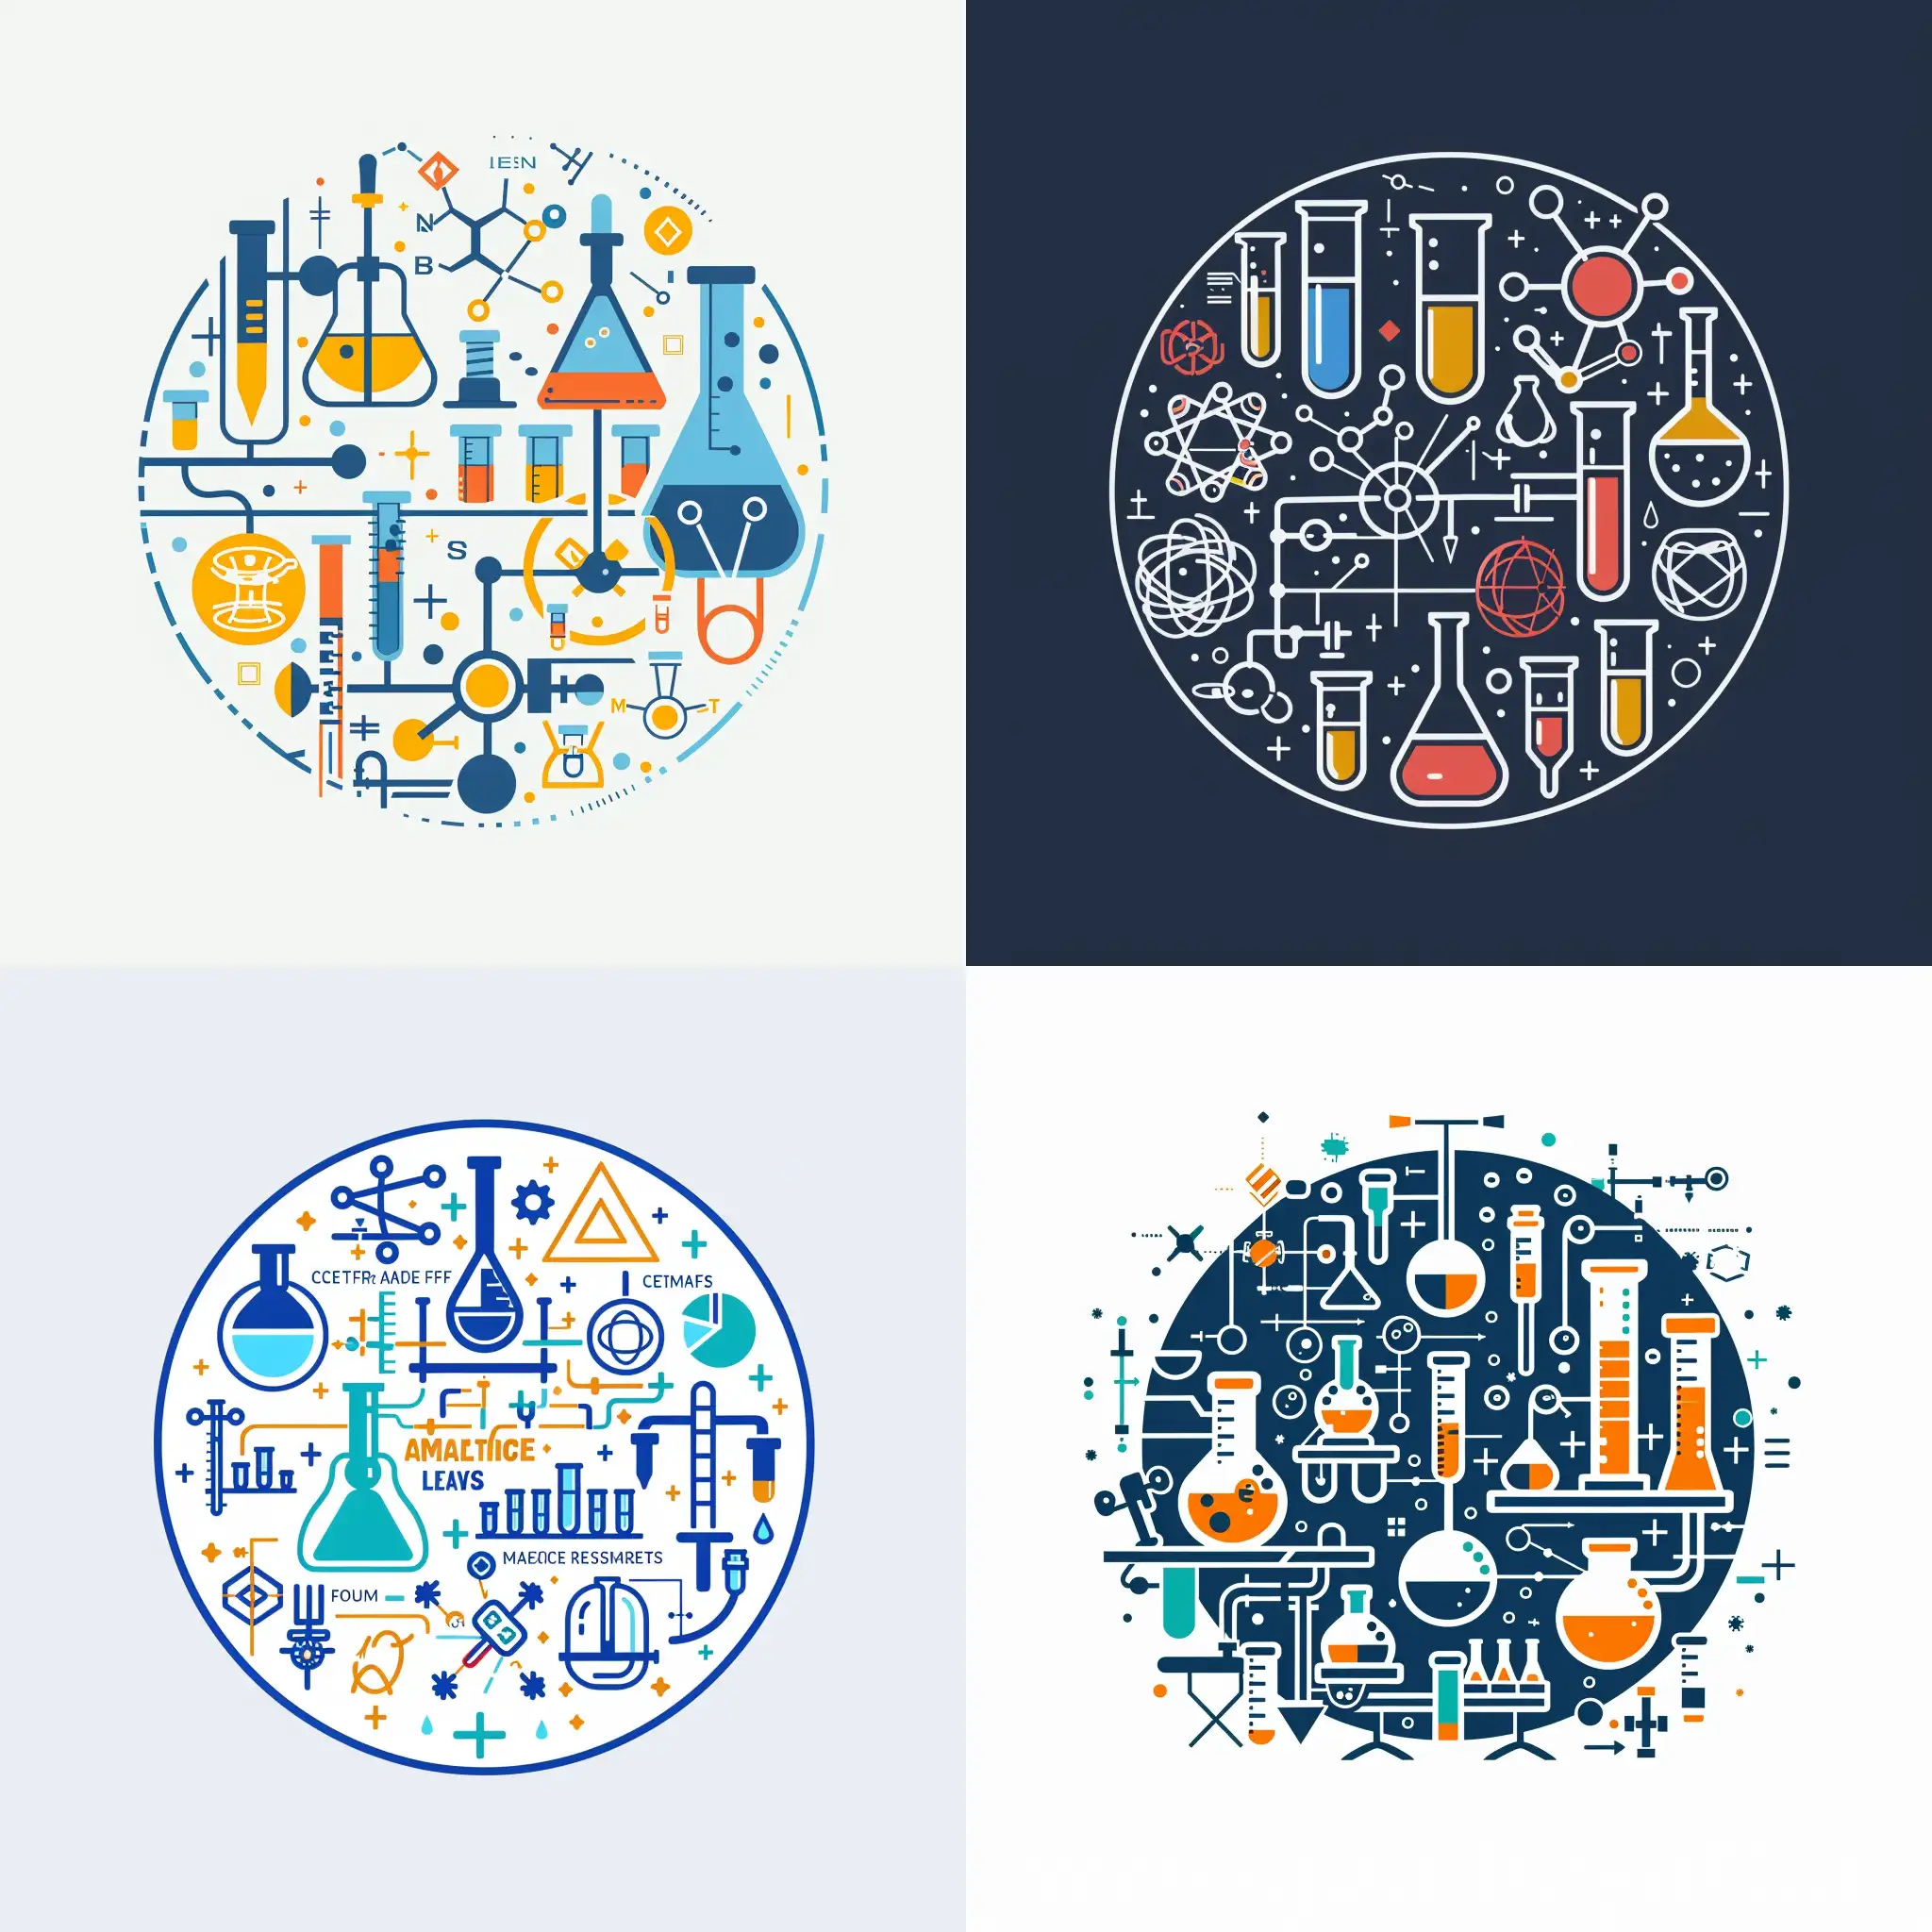 Design a round logo by Incorporating elements such as laboratory, industrial symbols, and educational symbols. Ensure the logo is professional, modern, and easily recognizable. Text must appear as Center for Advanced Material Research